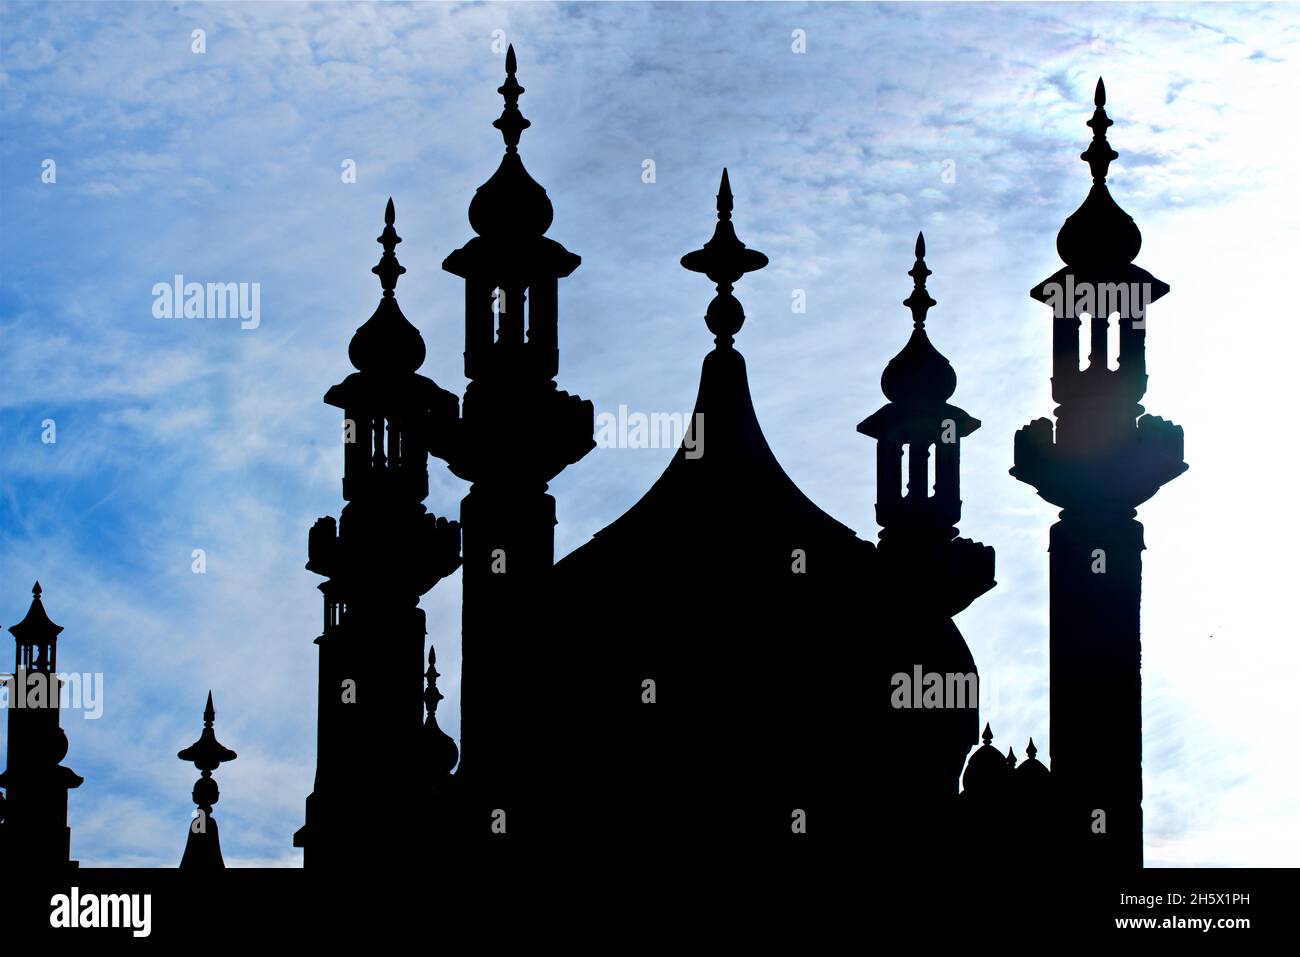 The Indian -inspired architecture of the Georgian period Royal Pavilion, Brighton, East Sussex, England, UK. Silhouetted dome and minarets. Indo-Saracenic Revival. Stock Photo